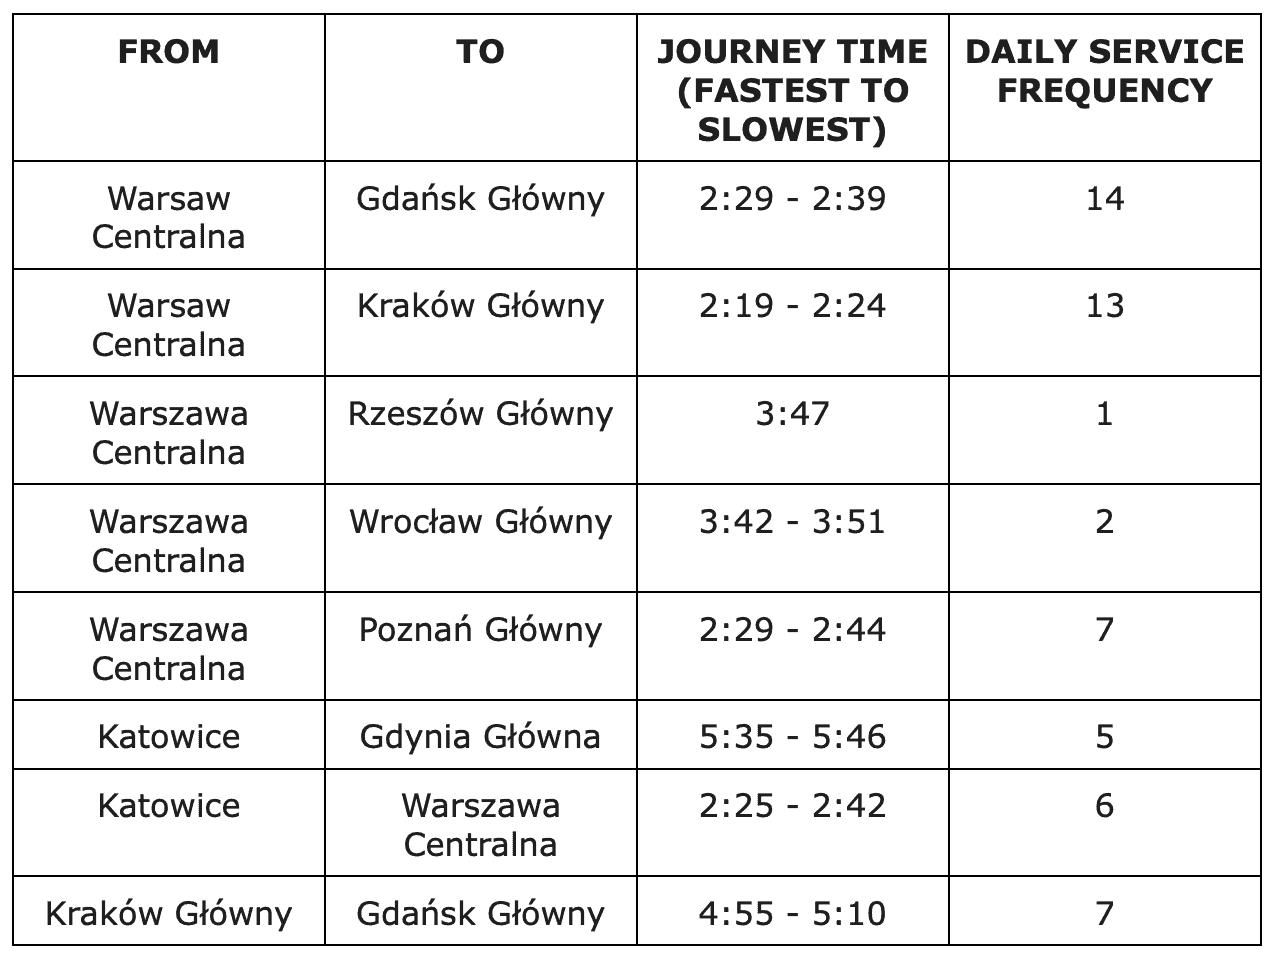 Journey times and daily frequency of Pendolino trains in Poland